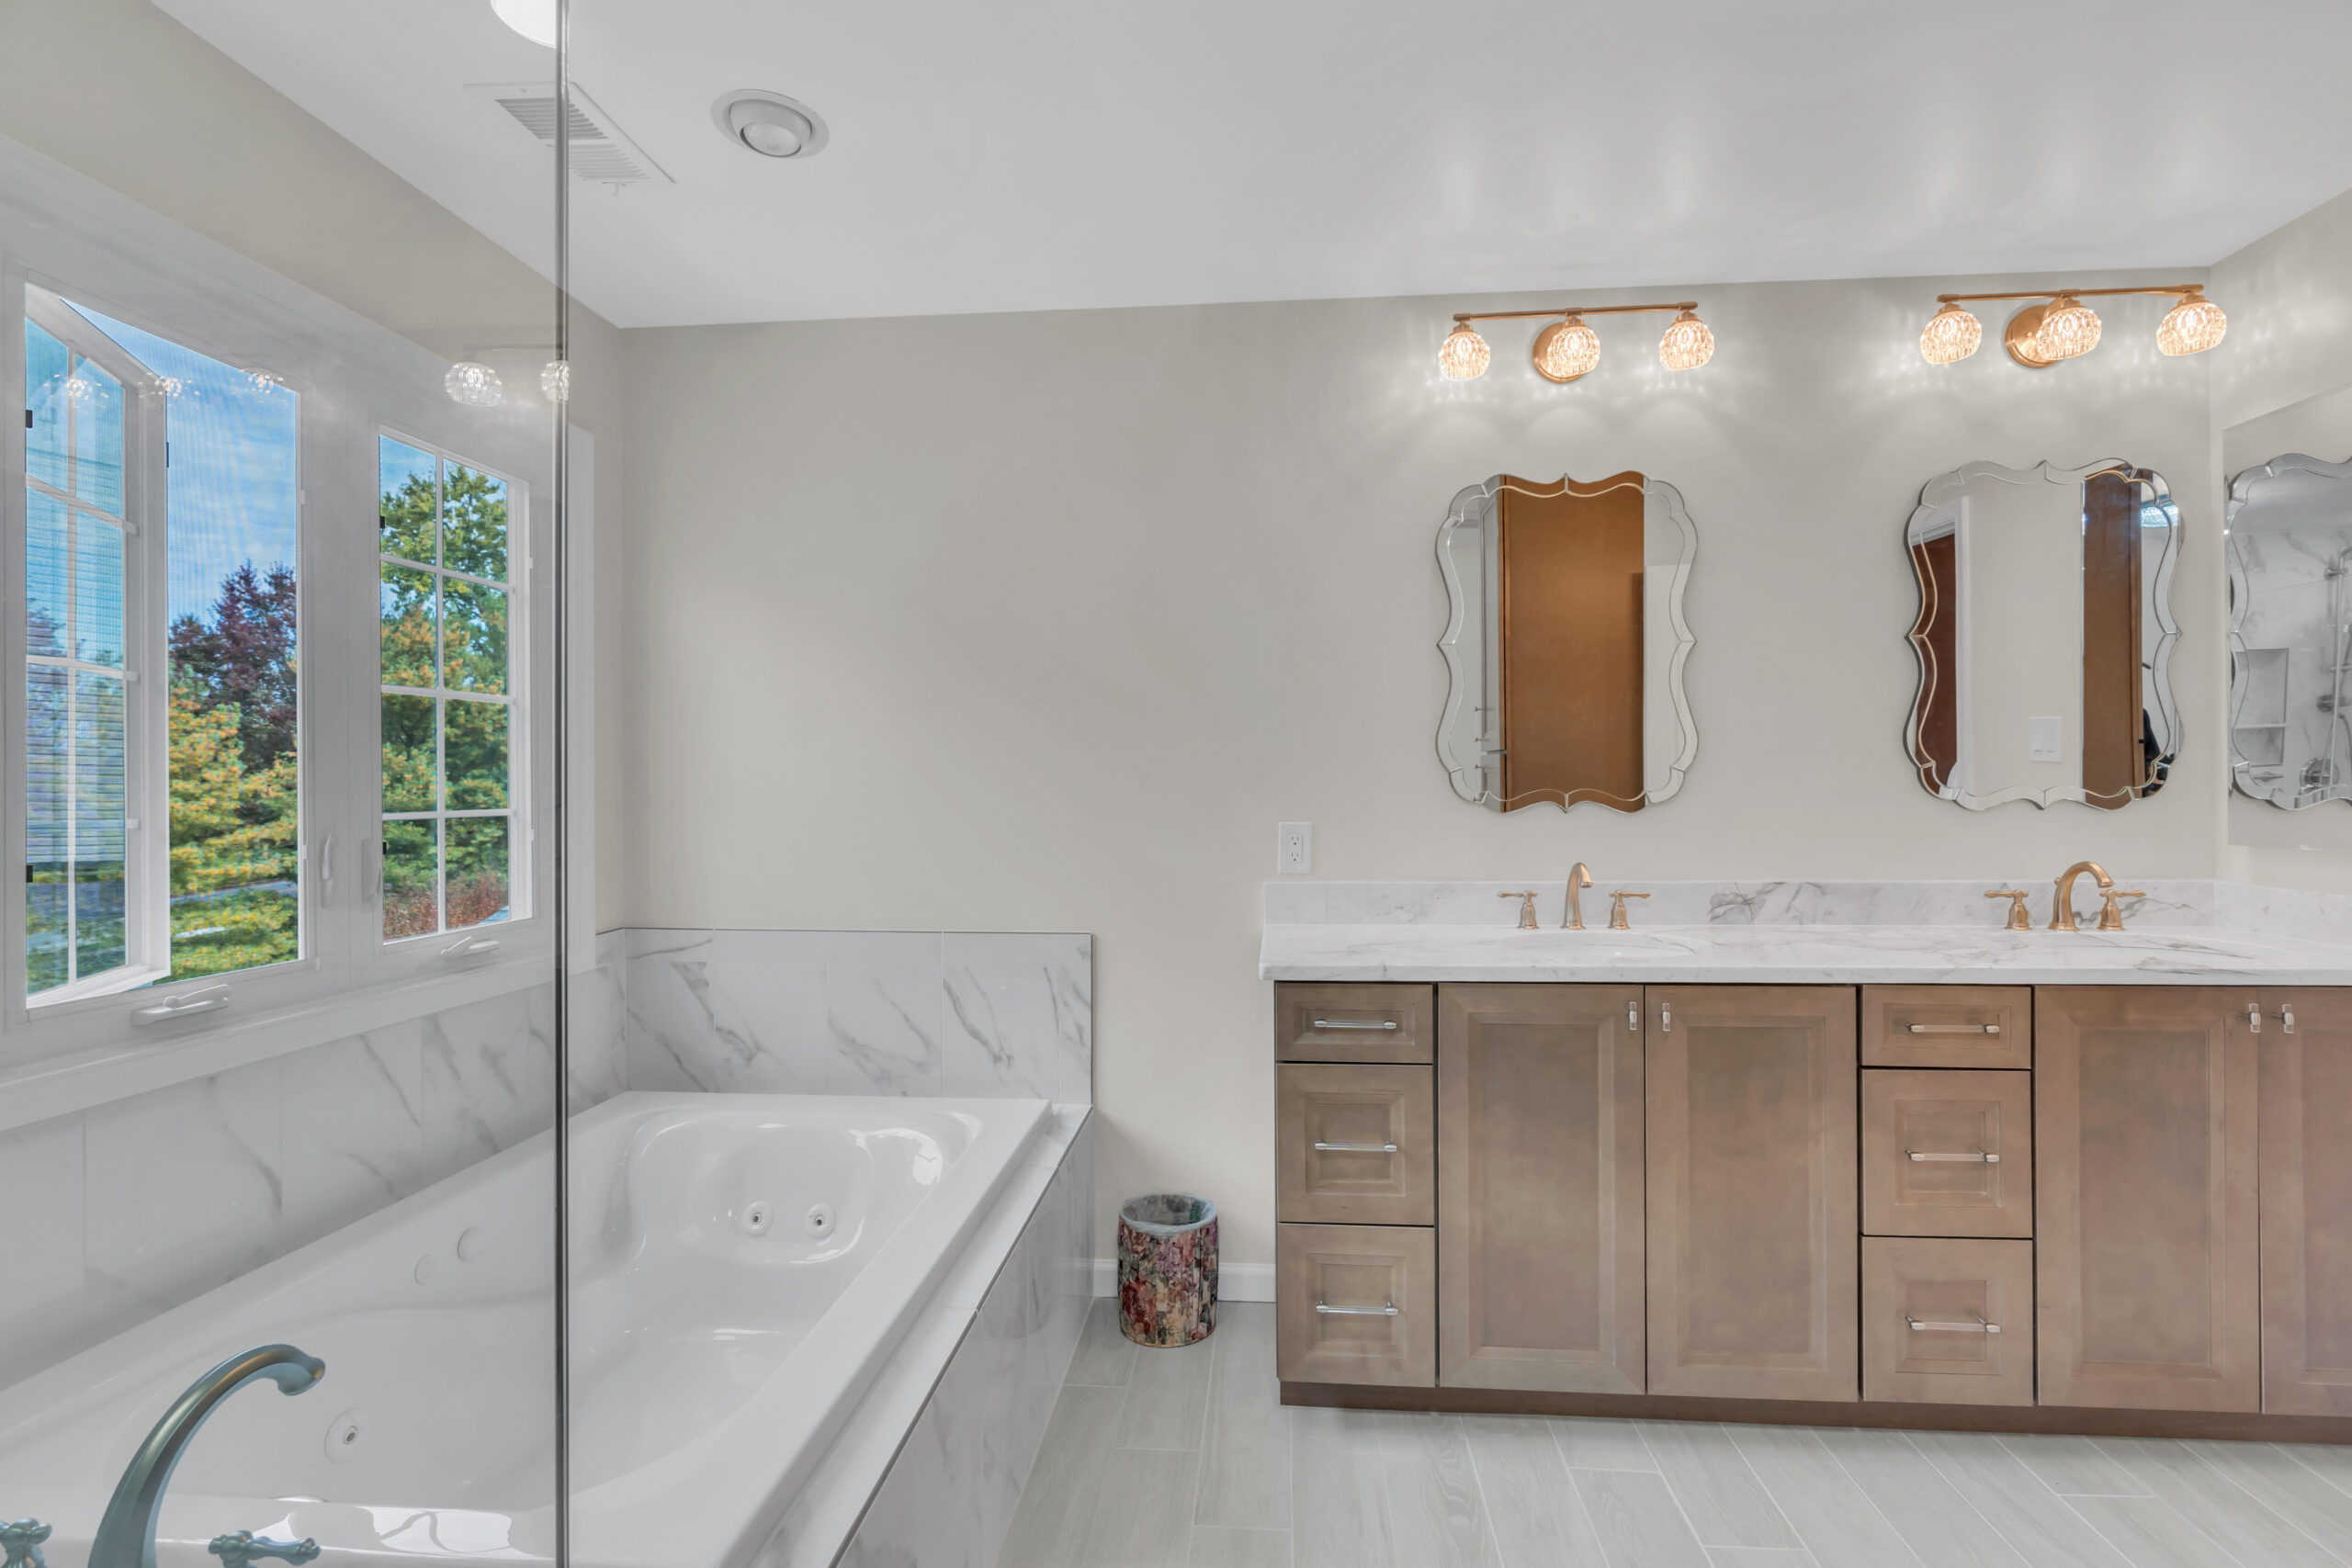 Spacious, luxury bathroom style with brown cabinets, bath tub and a shower